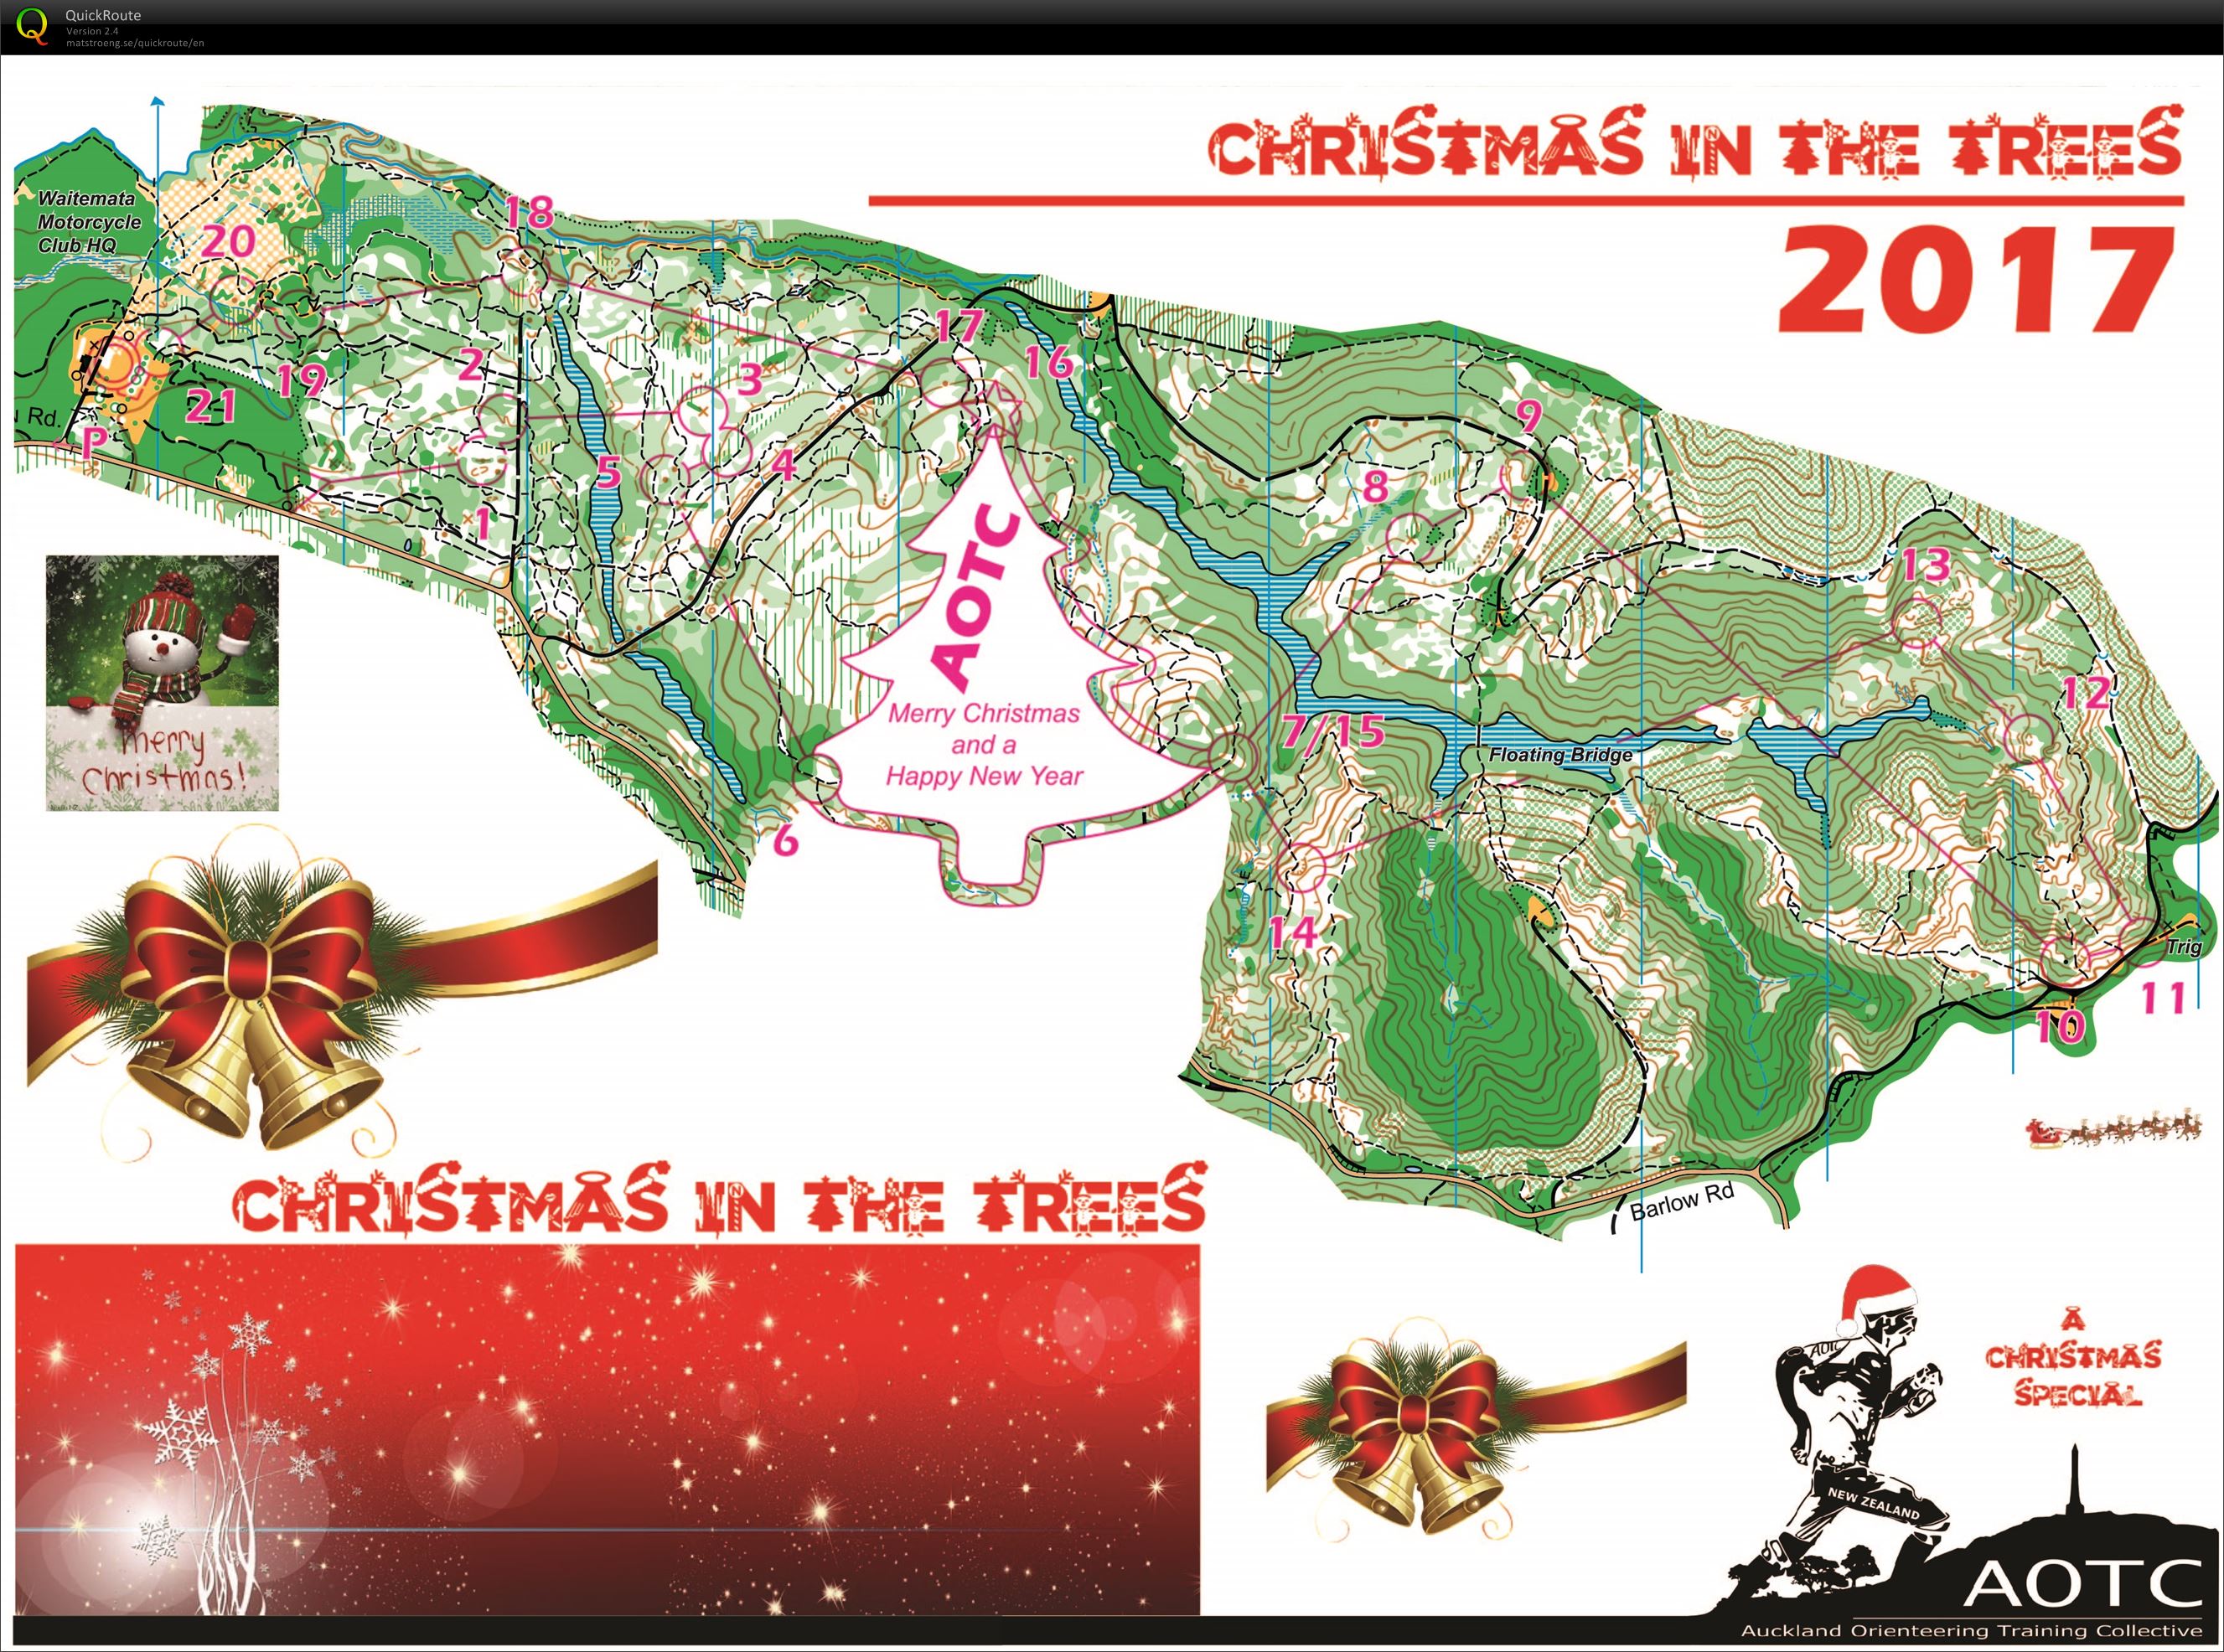 Christmas in the Trees 2017 (16-12-2017)